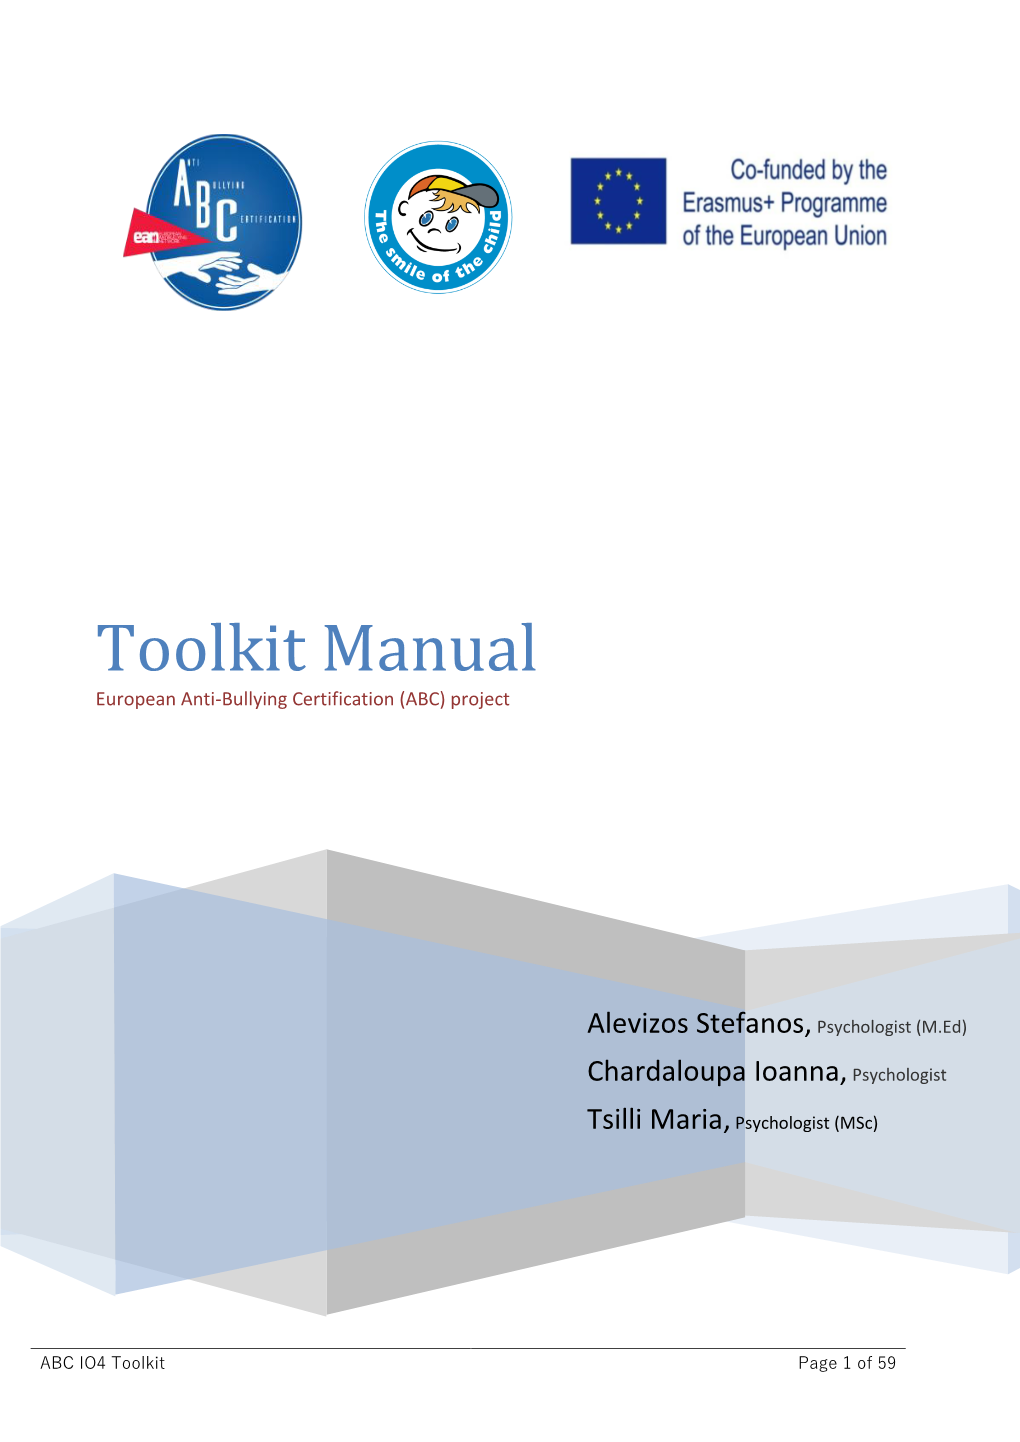 Toolkit Manual European Anti-Bullying Certification (ABC) Project